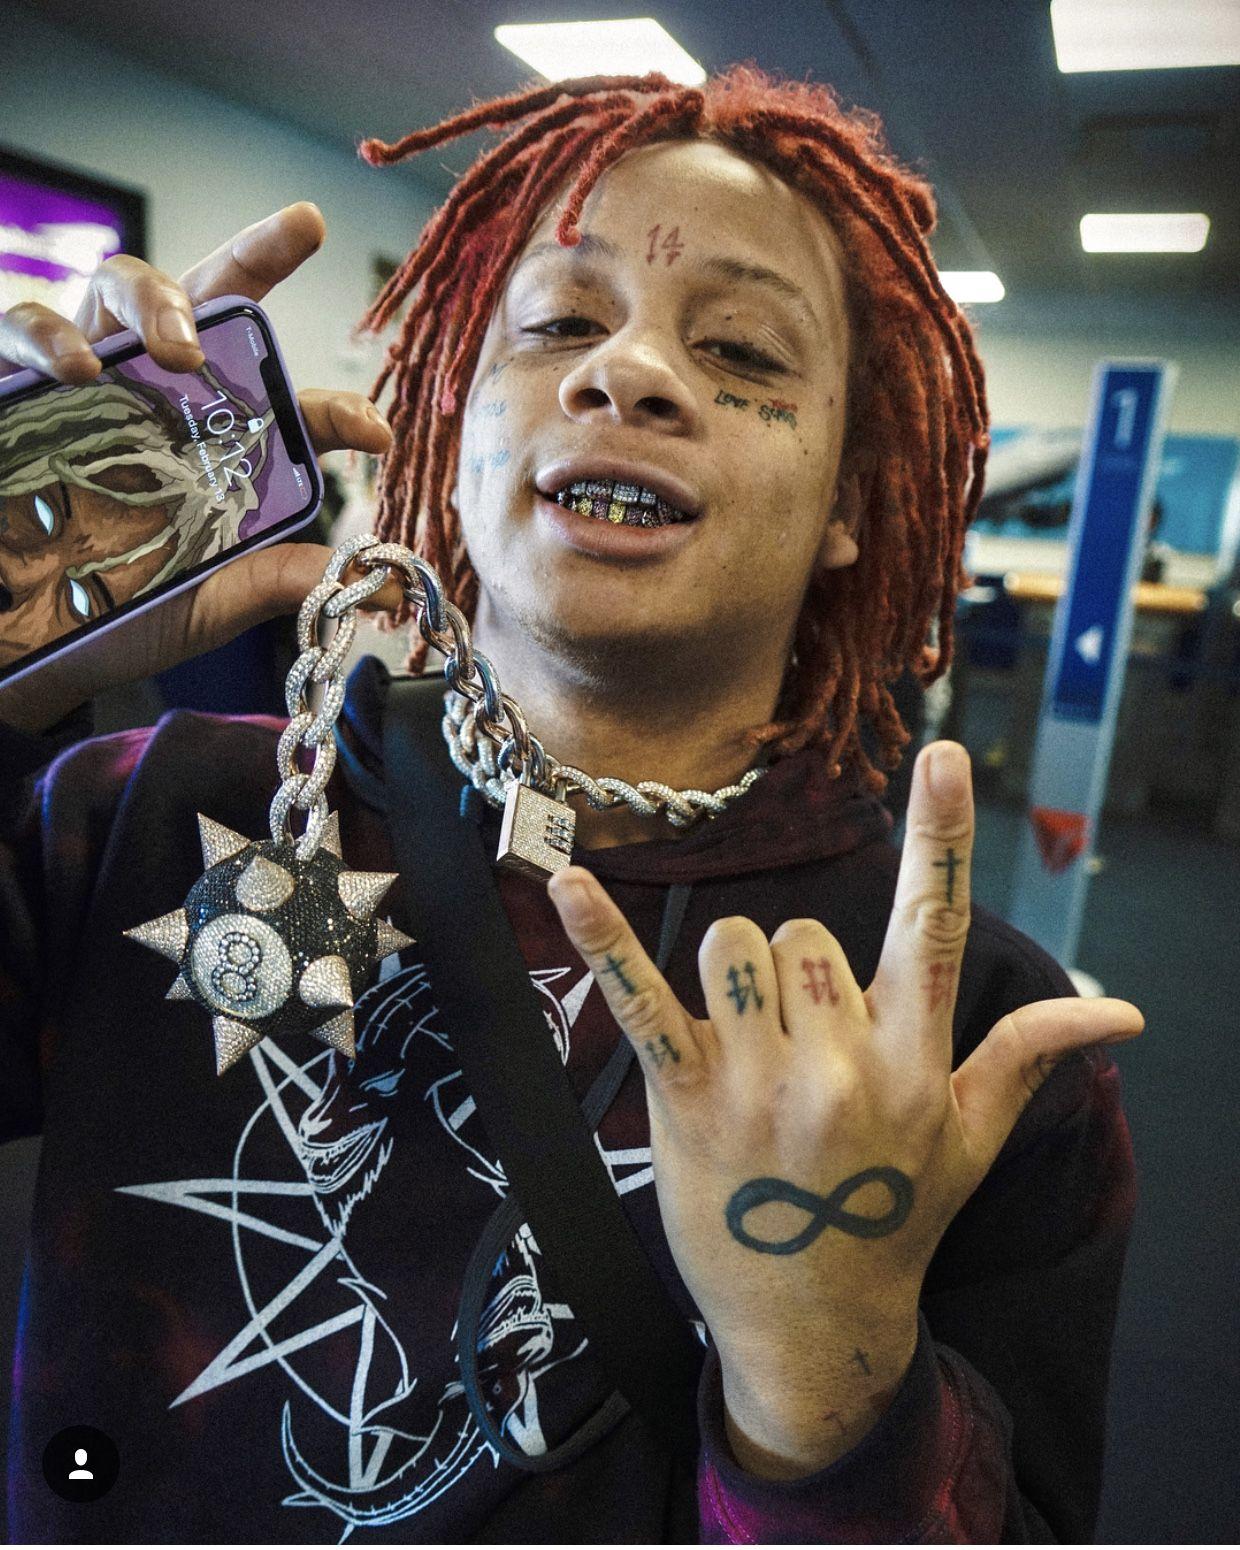 Rapper wallpaper iphone trippie redd pics cute rappers aesthetic pictures m...